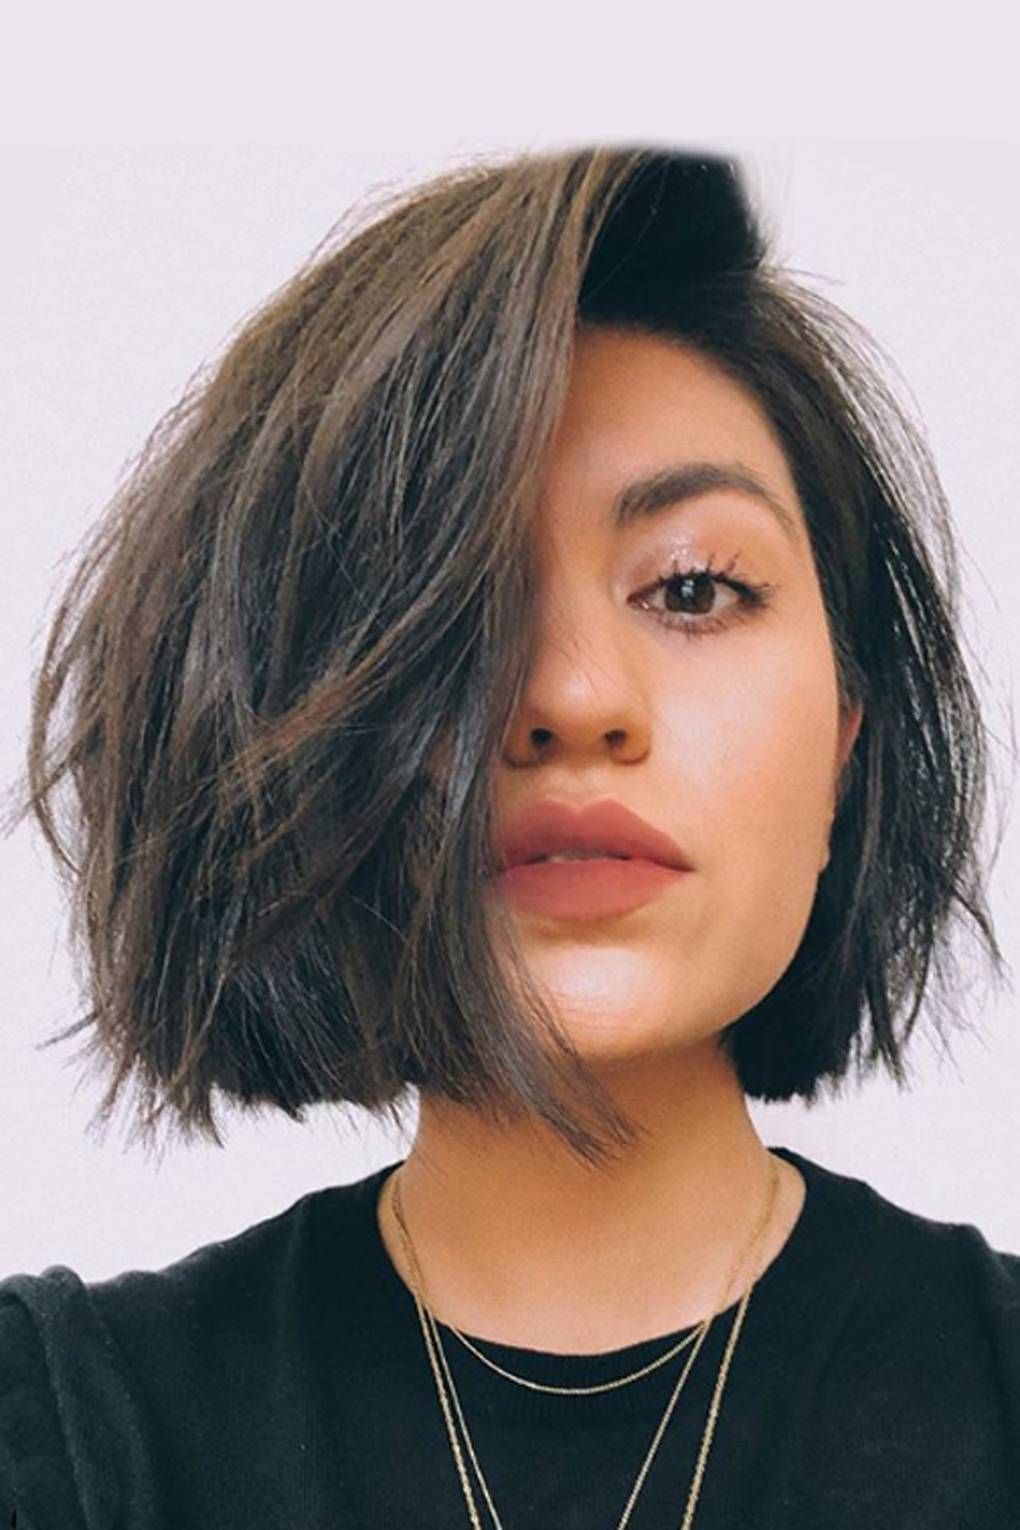 Everyone’s asking for the ‘hacked bob’ in hair salons, because it’s a more rebellious take on the short chop